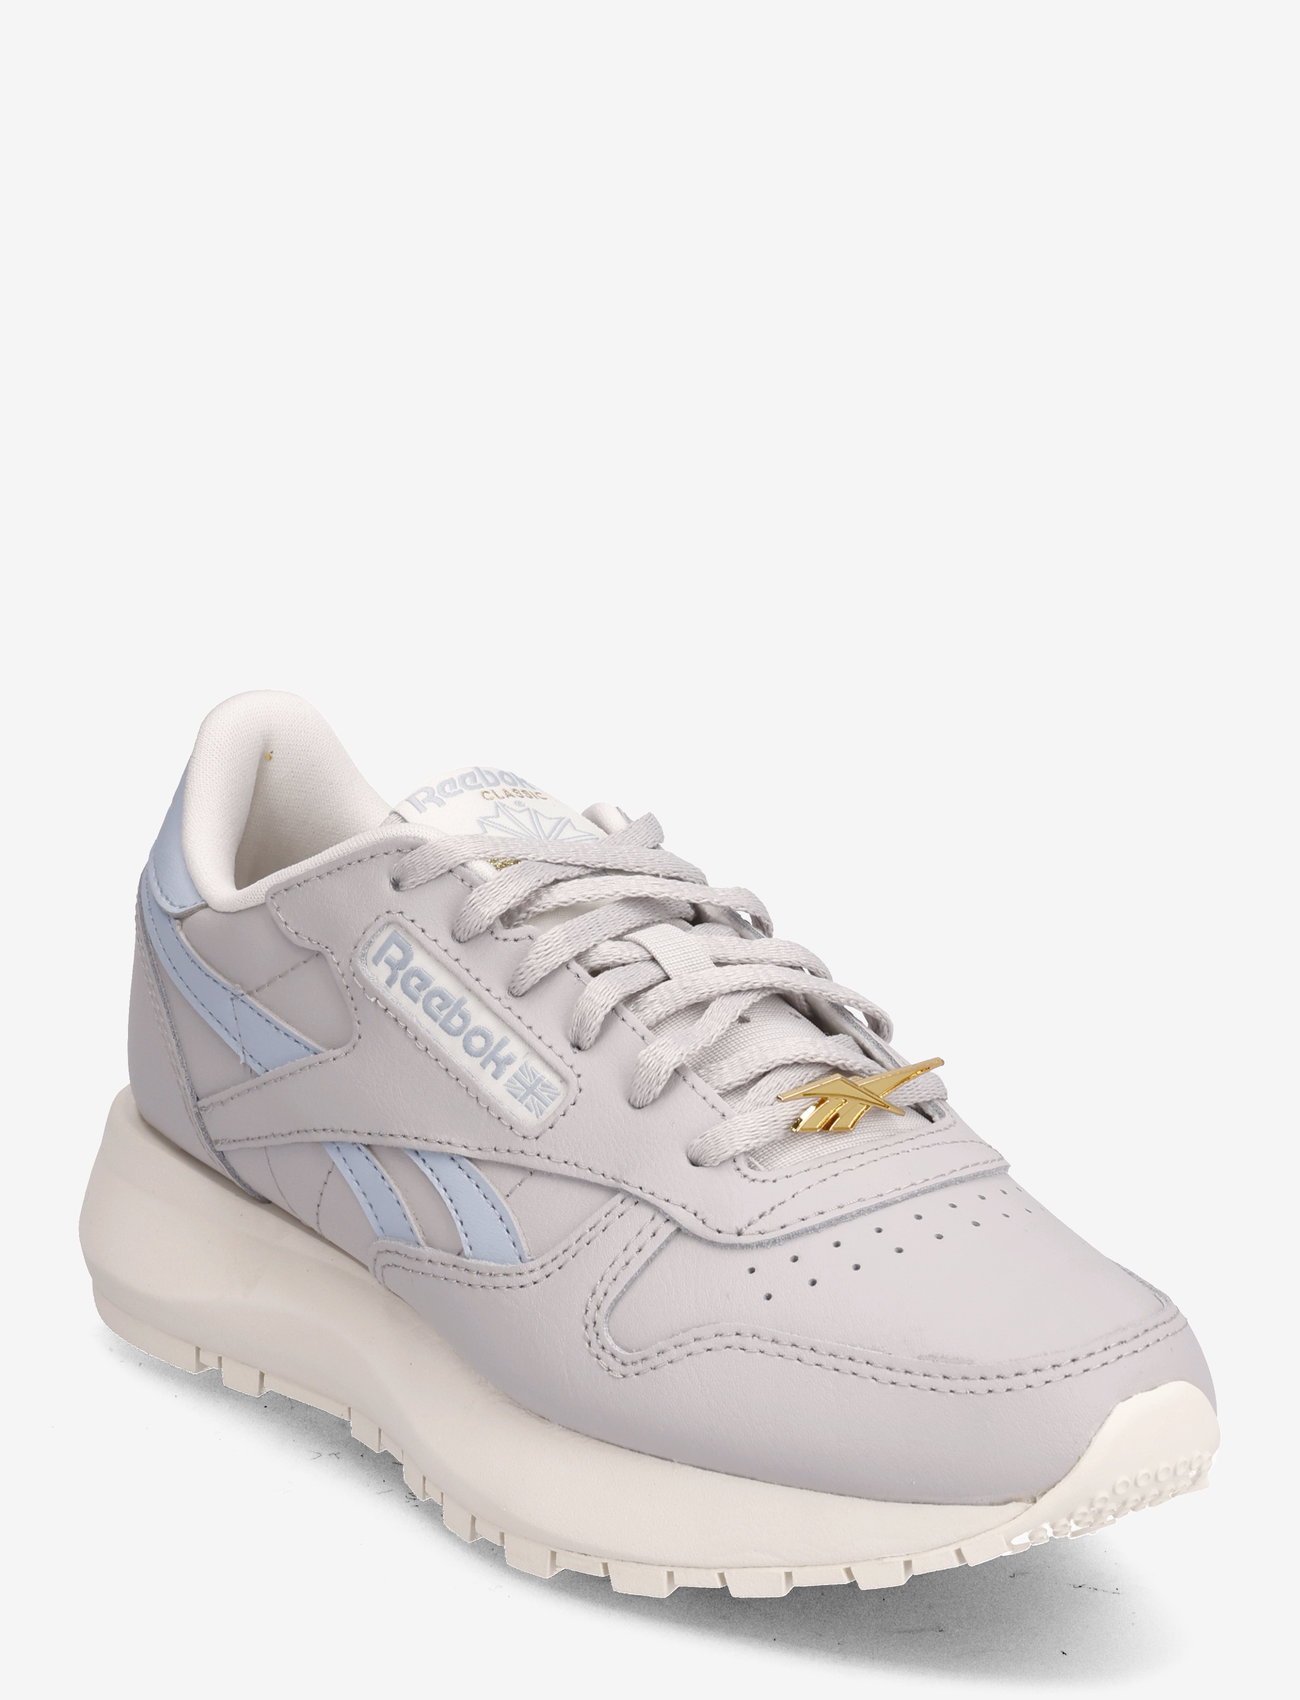 Reebok Classics - CLASSIC LEATHER SP - low top sneakers - stefog/gabgry/chalk - 0